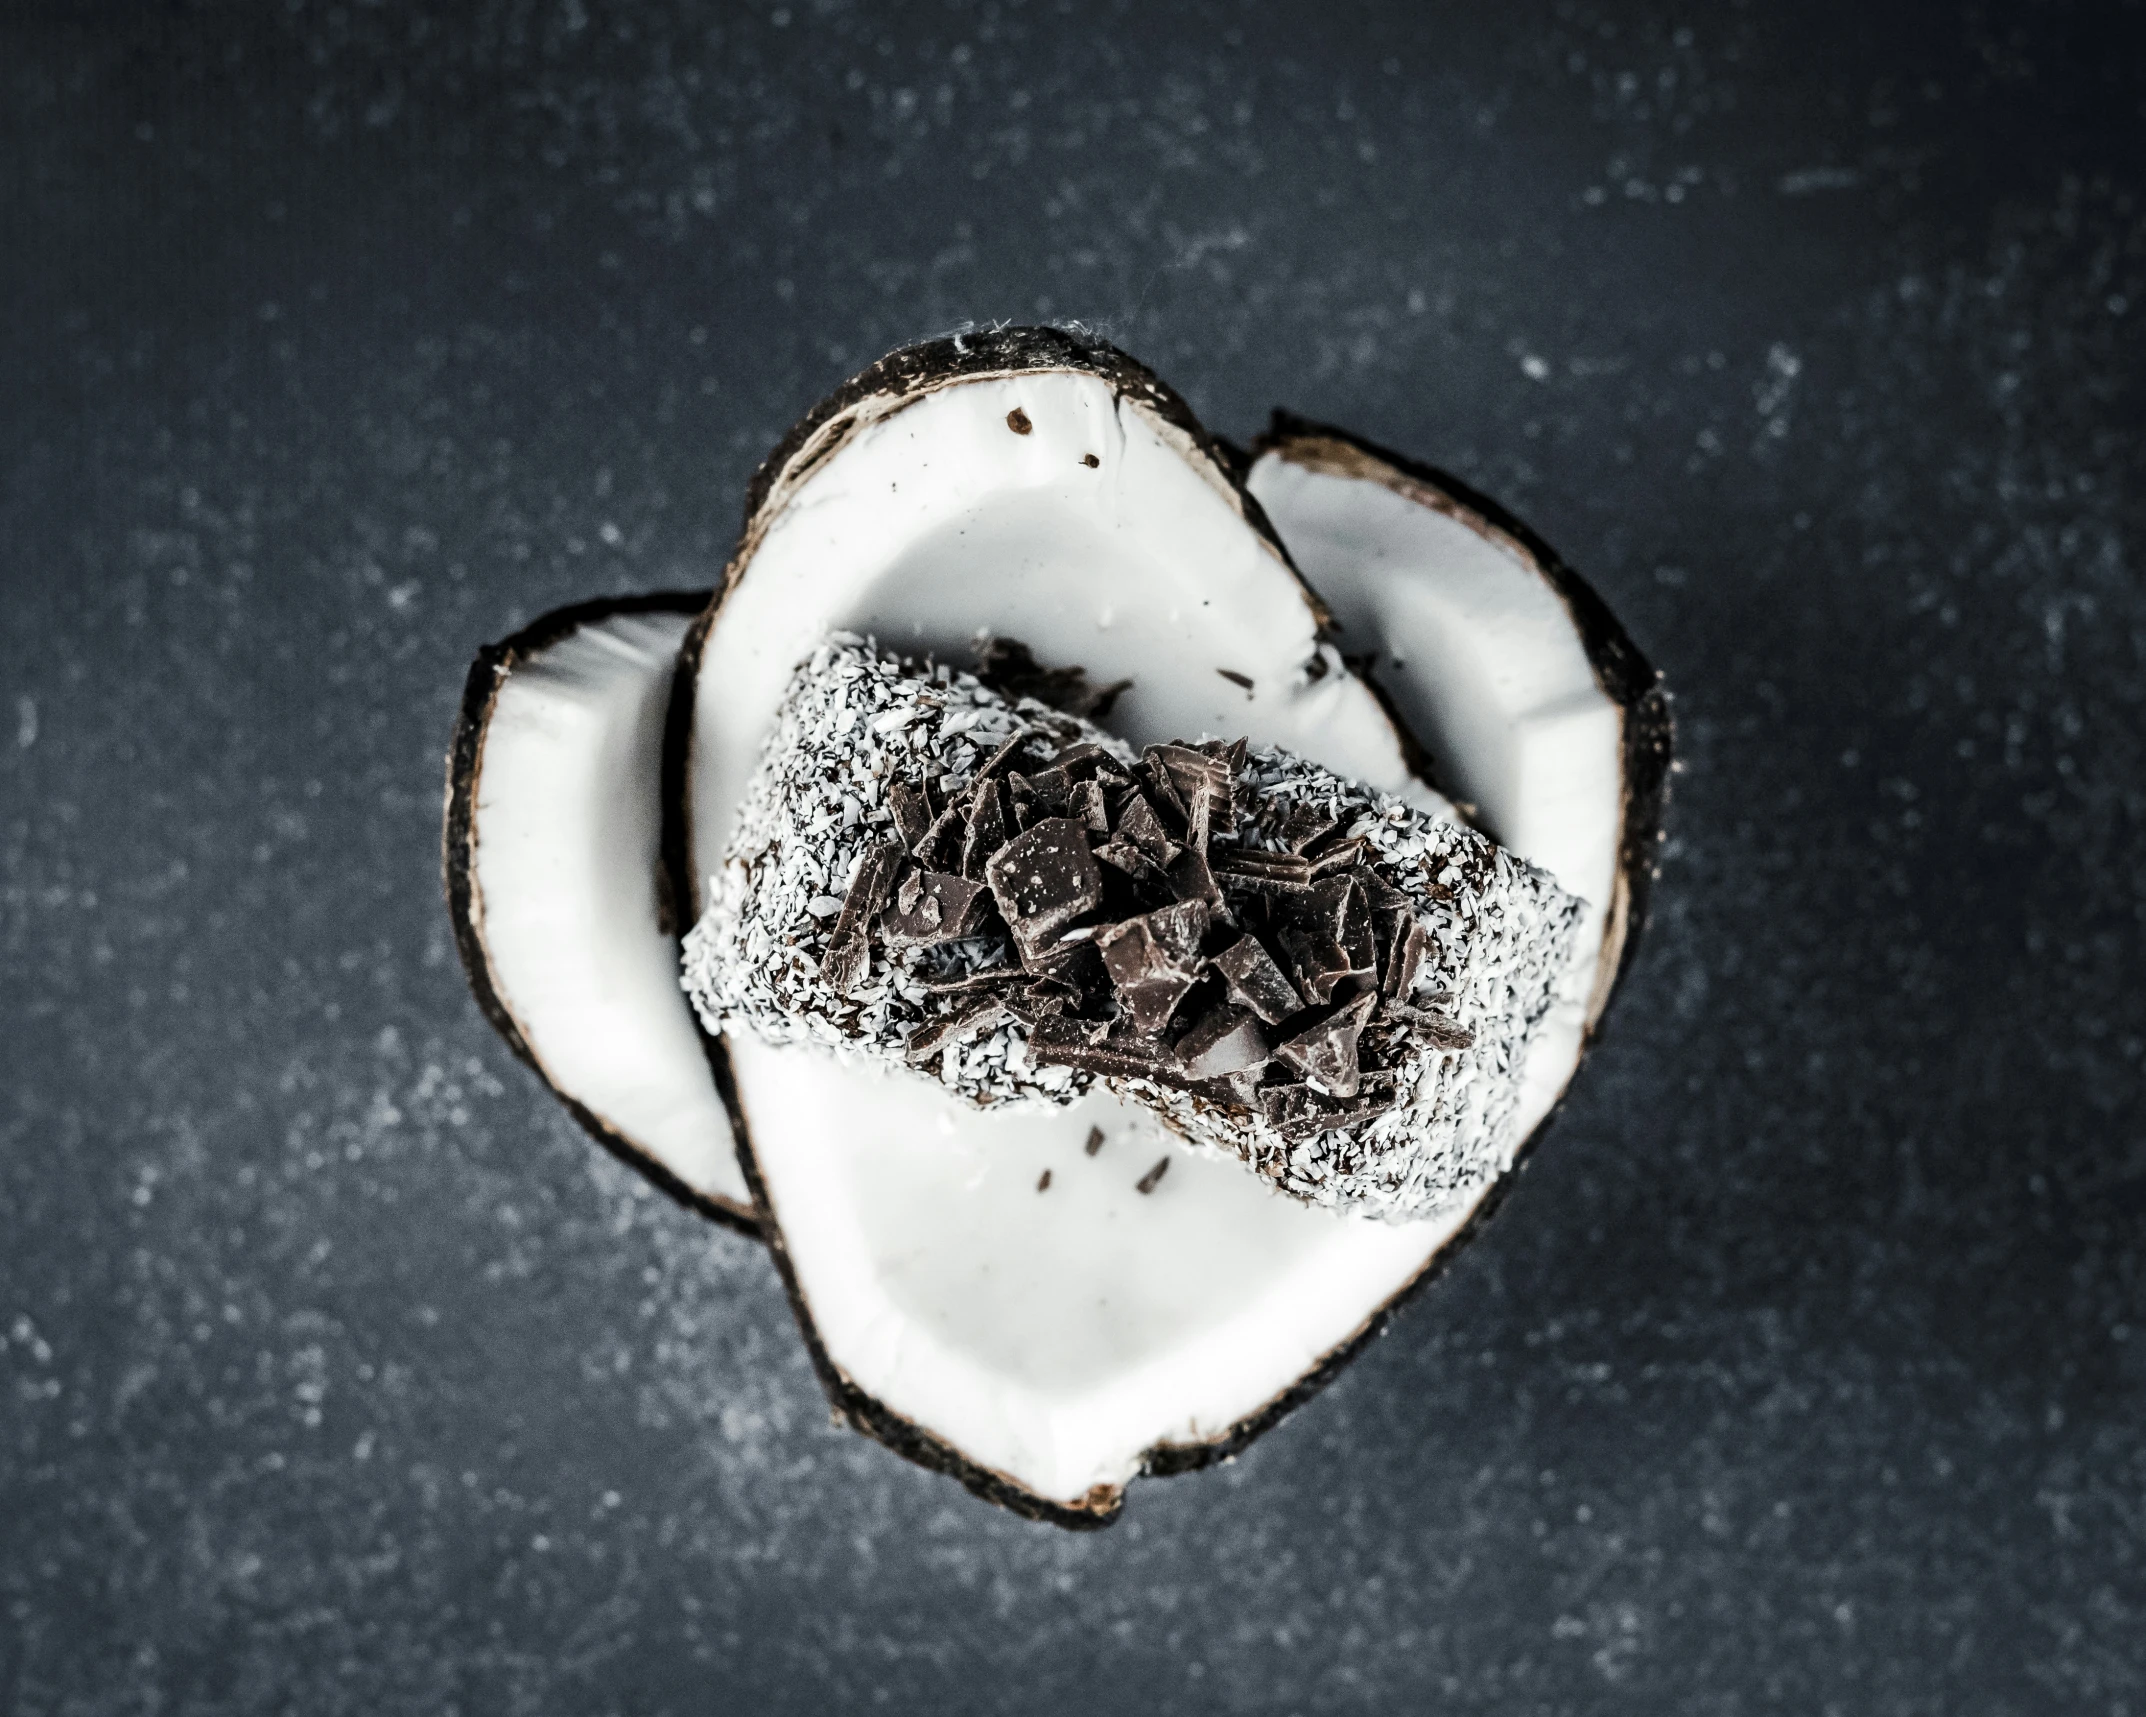 an image of an oyster with sand and ice